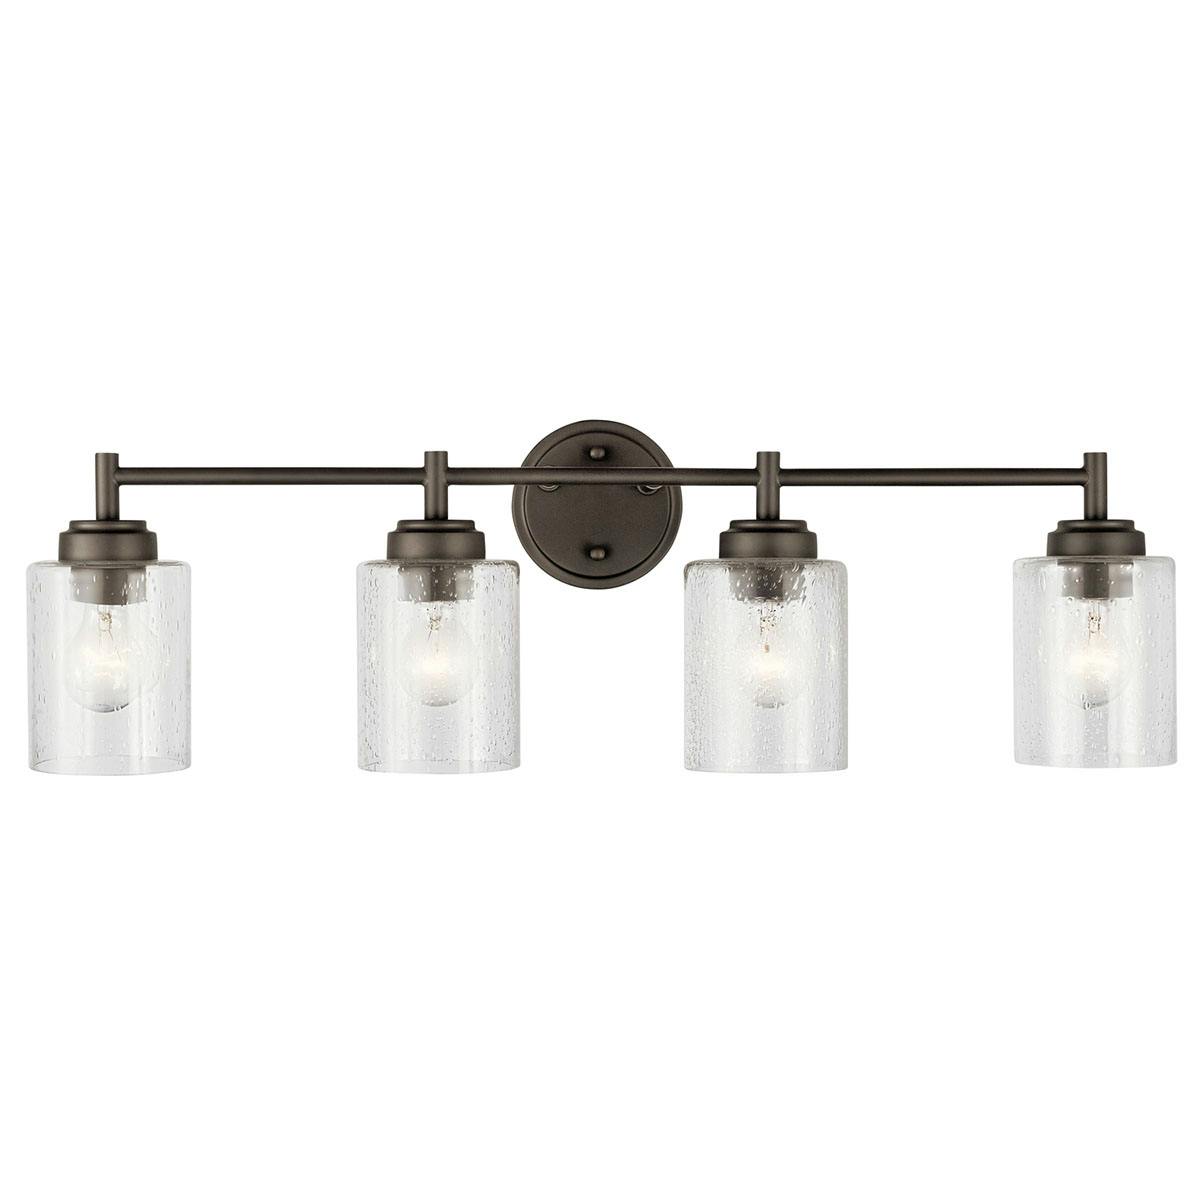 The Winslow 30" Vanity Light Olde Bronze facing down on a white background